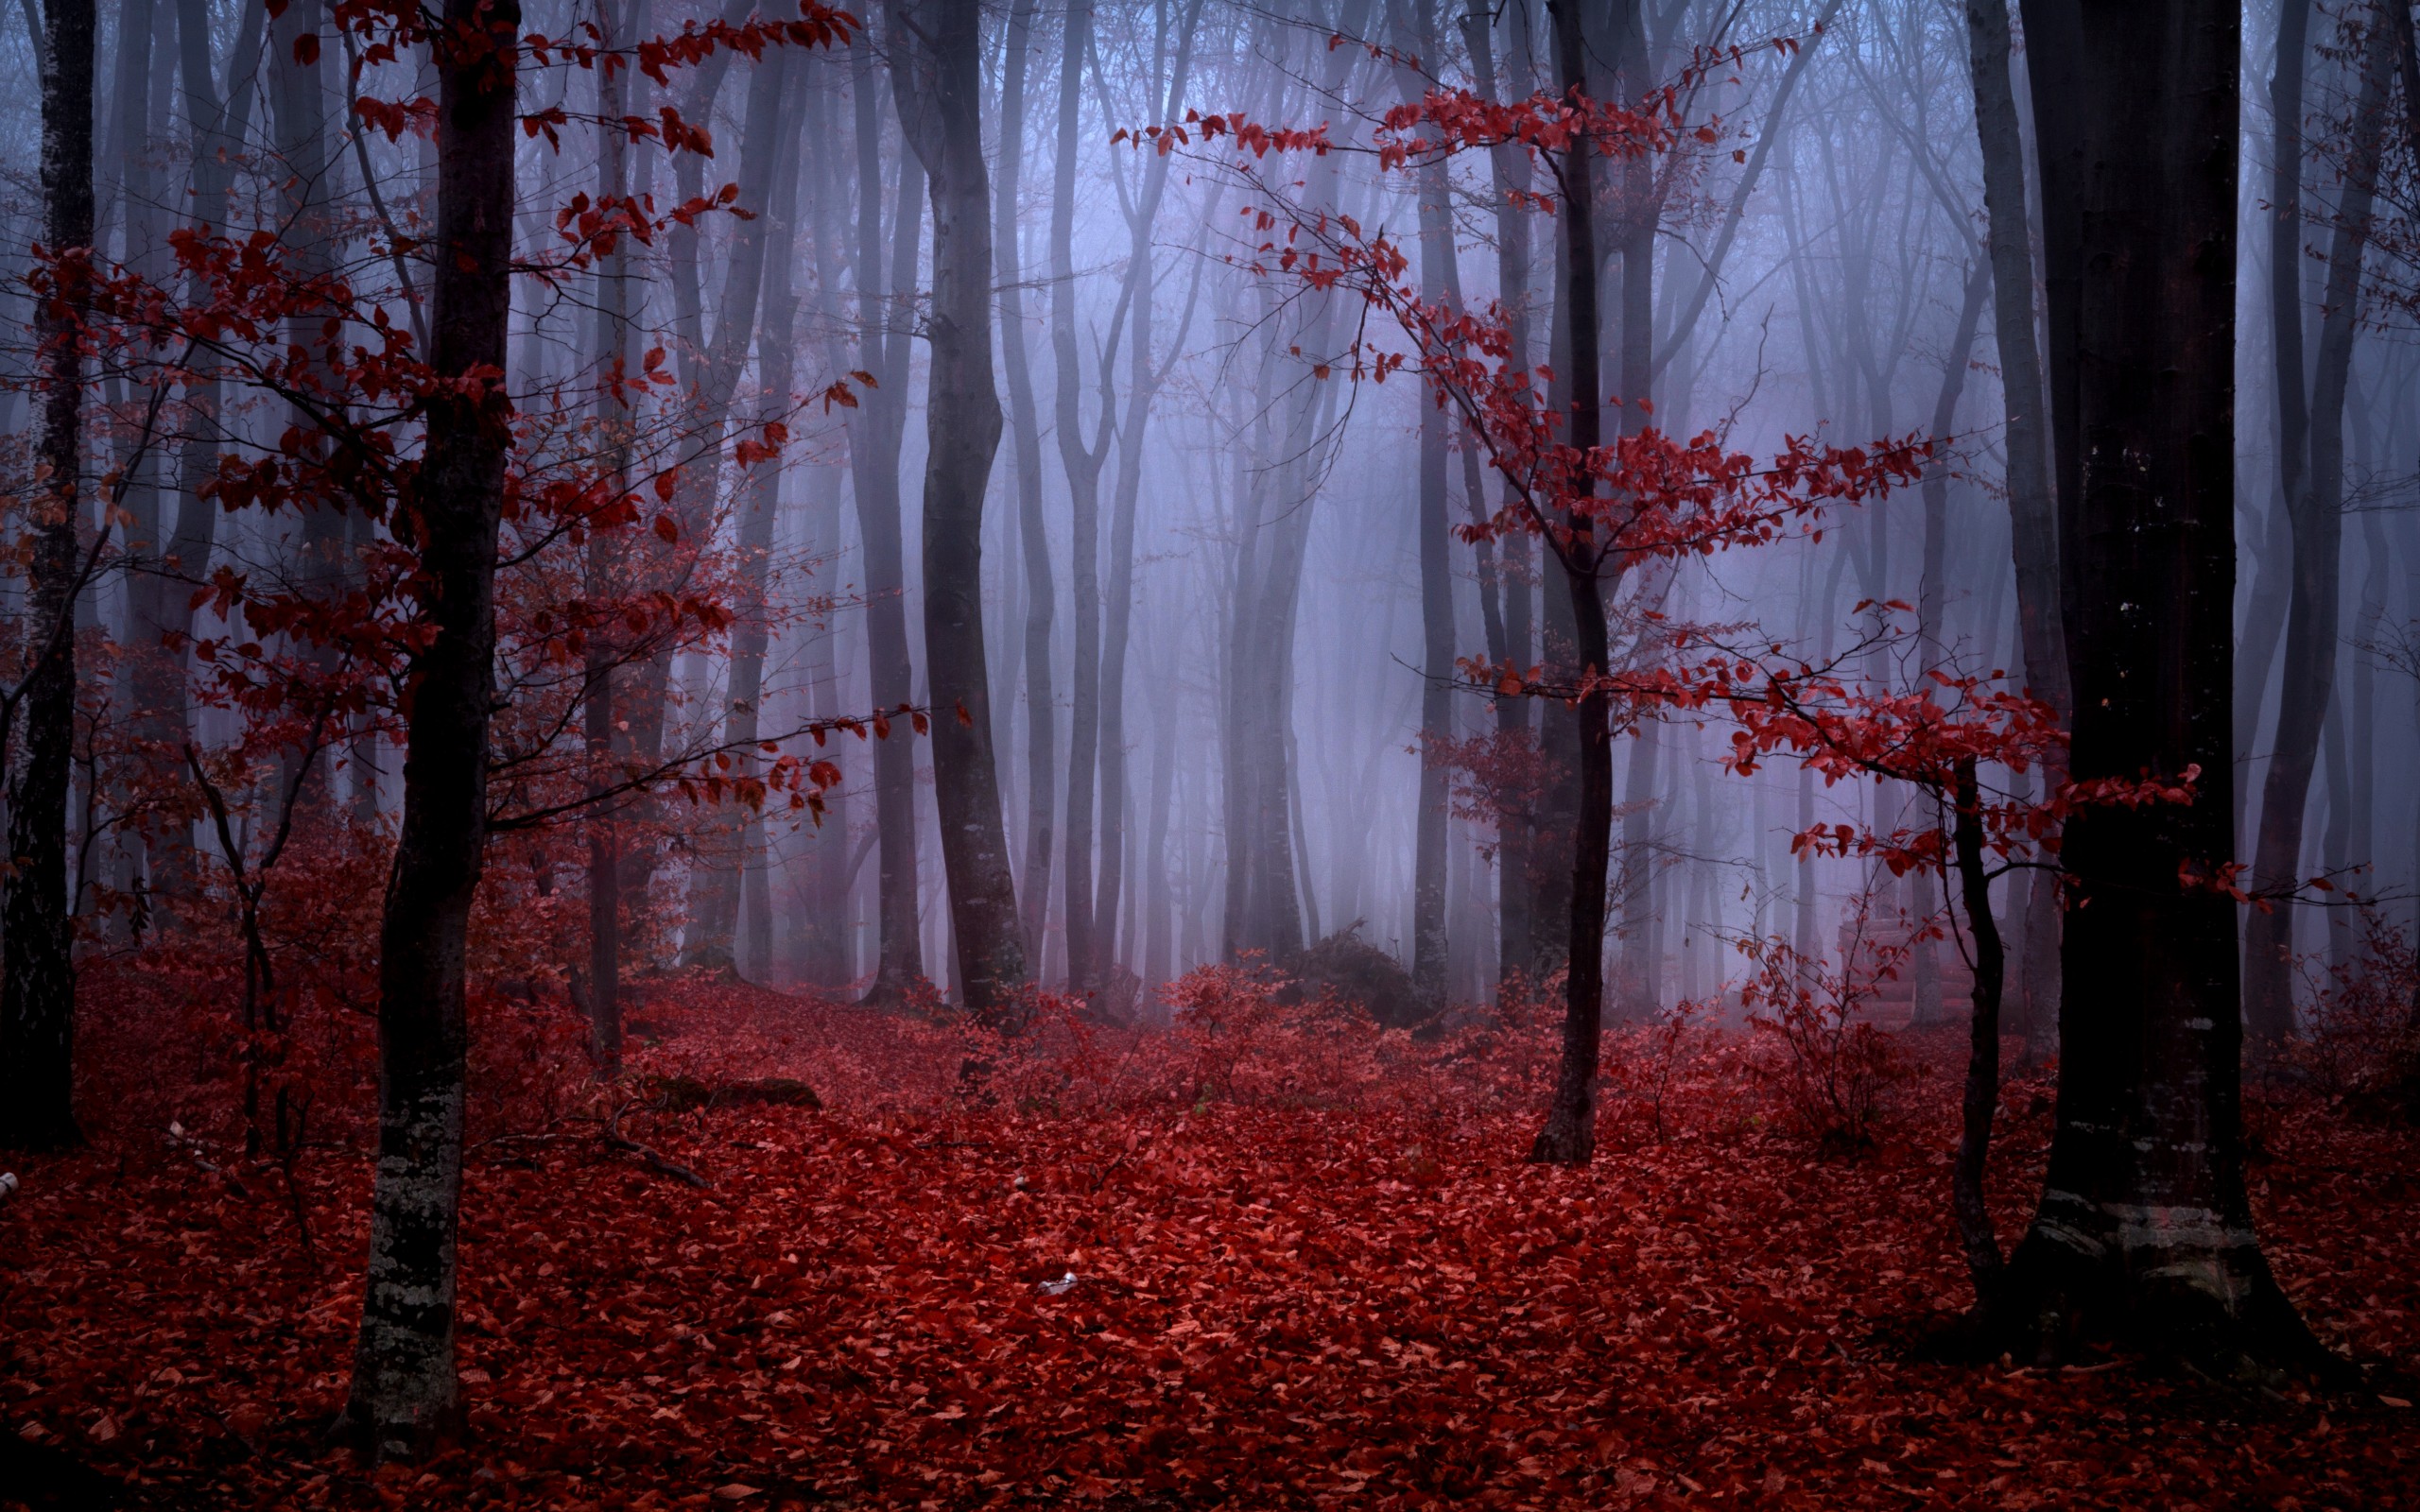 forest, Fog, Autumn, Trees, Branches, Leaves, Maroon, Red, Nature  Wallpapers HD / Desktop and Mobile Backgrounds